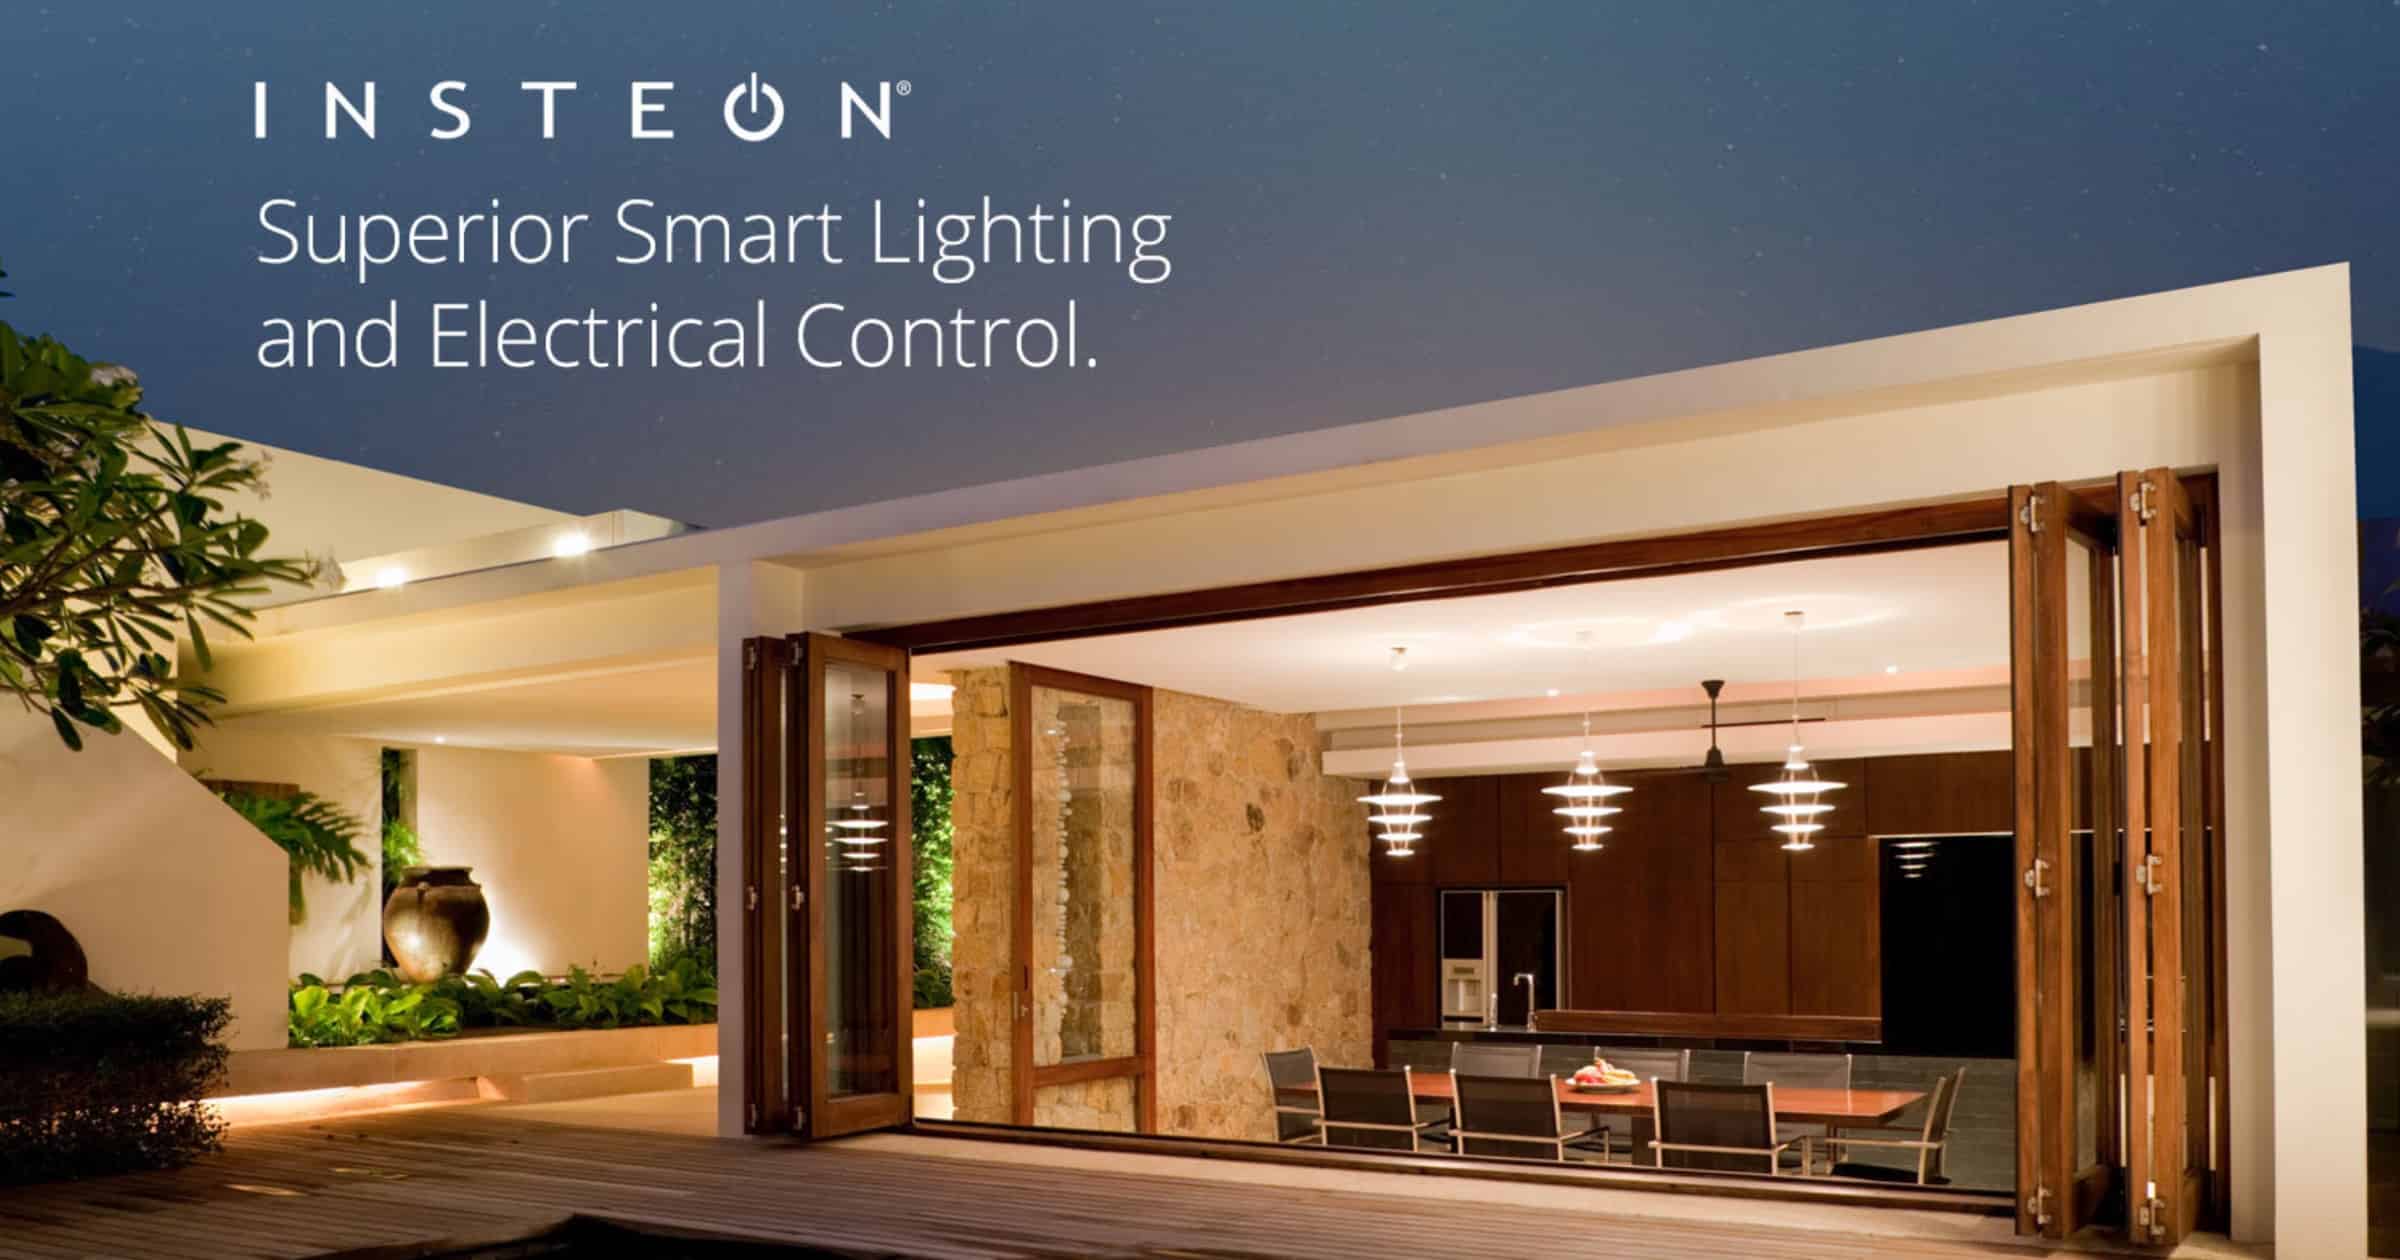 Insteon Smart Home System May Have Shut Down Without Telling Customers